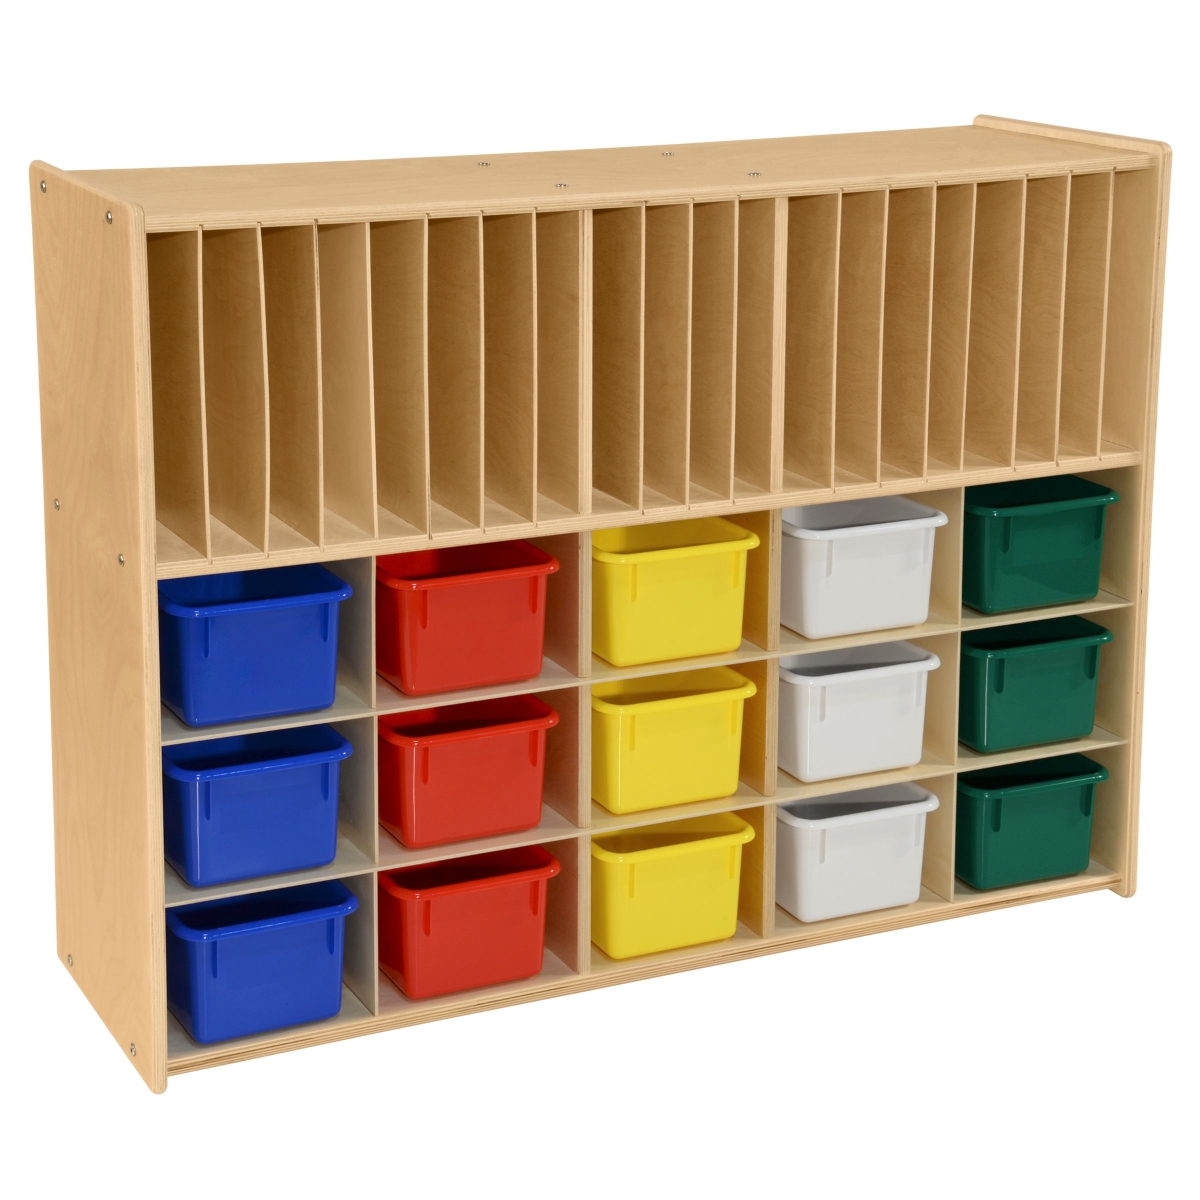 C990326f-at 15 Assorted Bin Cubby Storage With Paper Slots - Assembled